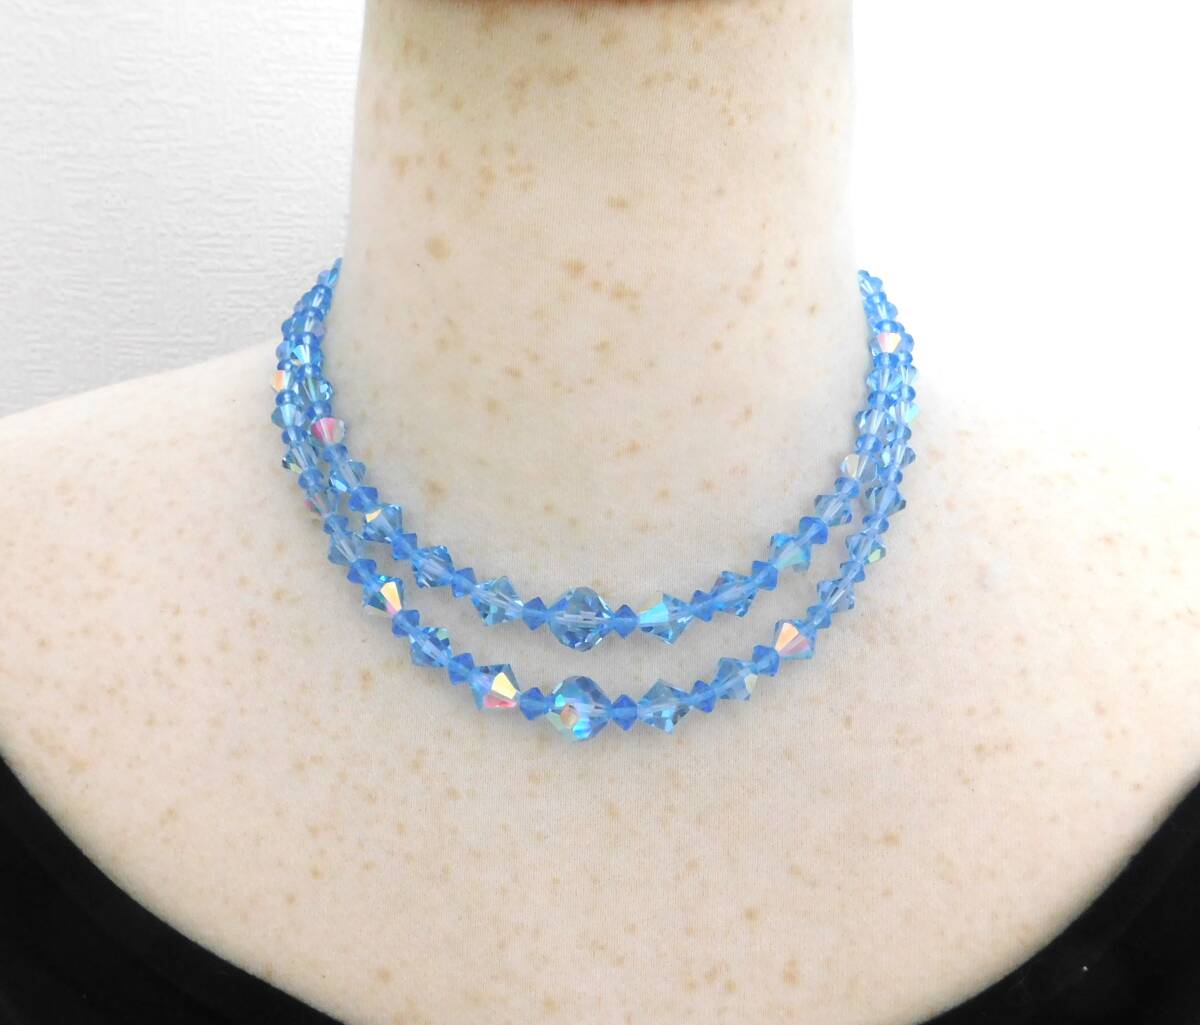  Vintage transparent feeling exist blue Aurora glass beads 2 ream. old beautiful necklace postage 140